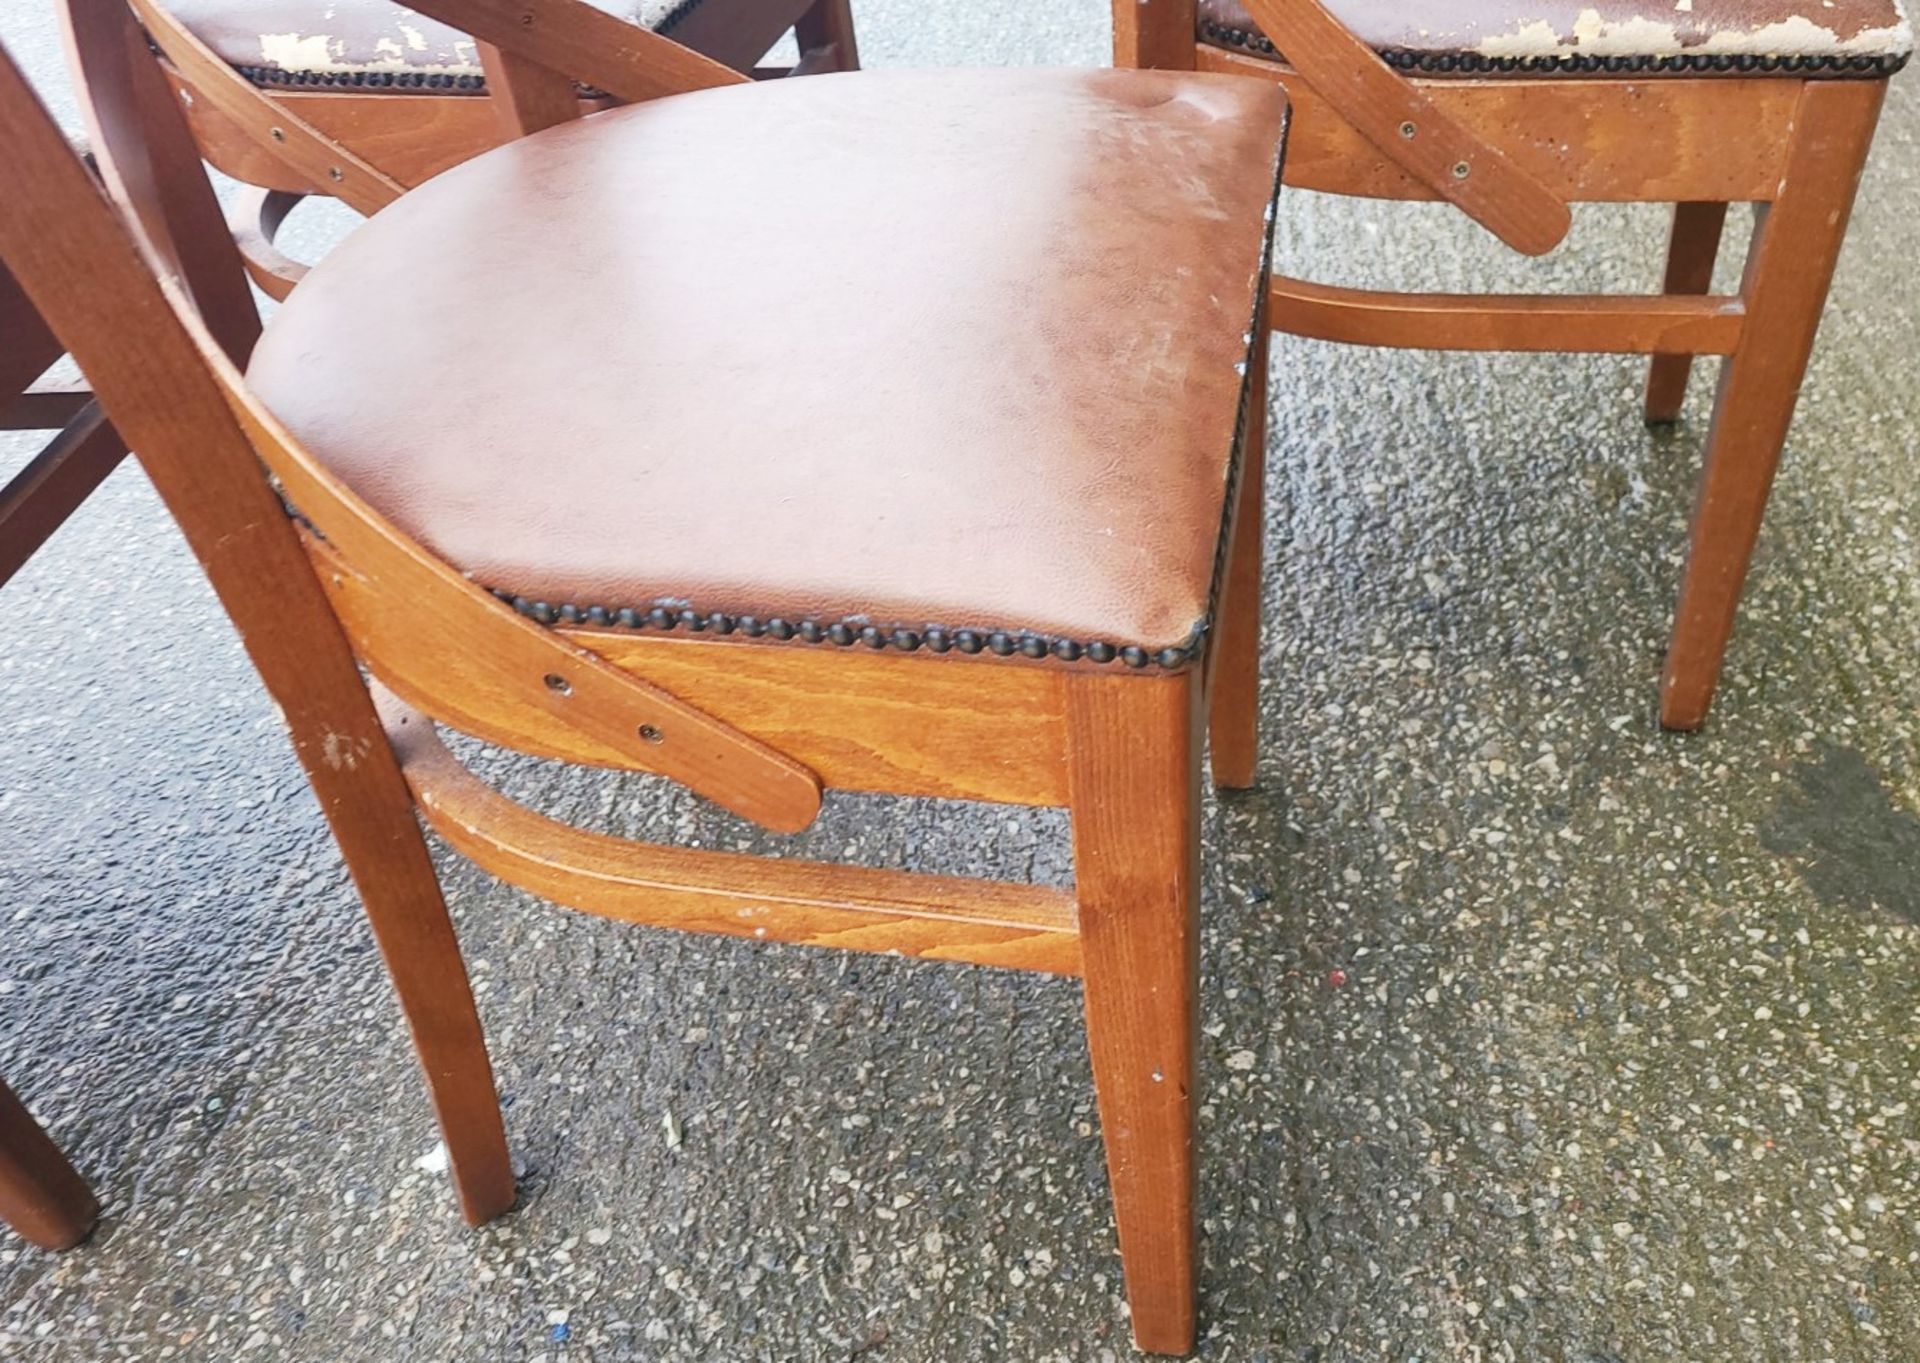 Set Of 4 x 'Leopold' Style Bentwood Side Chair In Walnut Stain & Faux Brown Leather Seat Cushion - Image 5 of 5